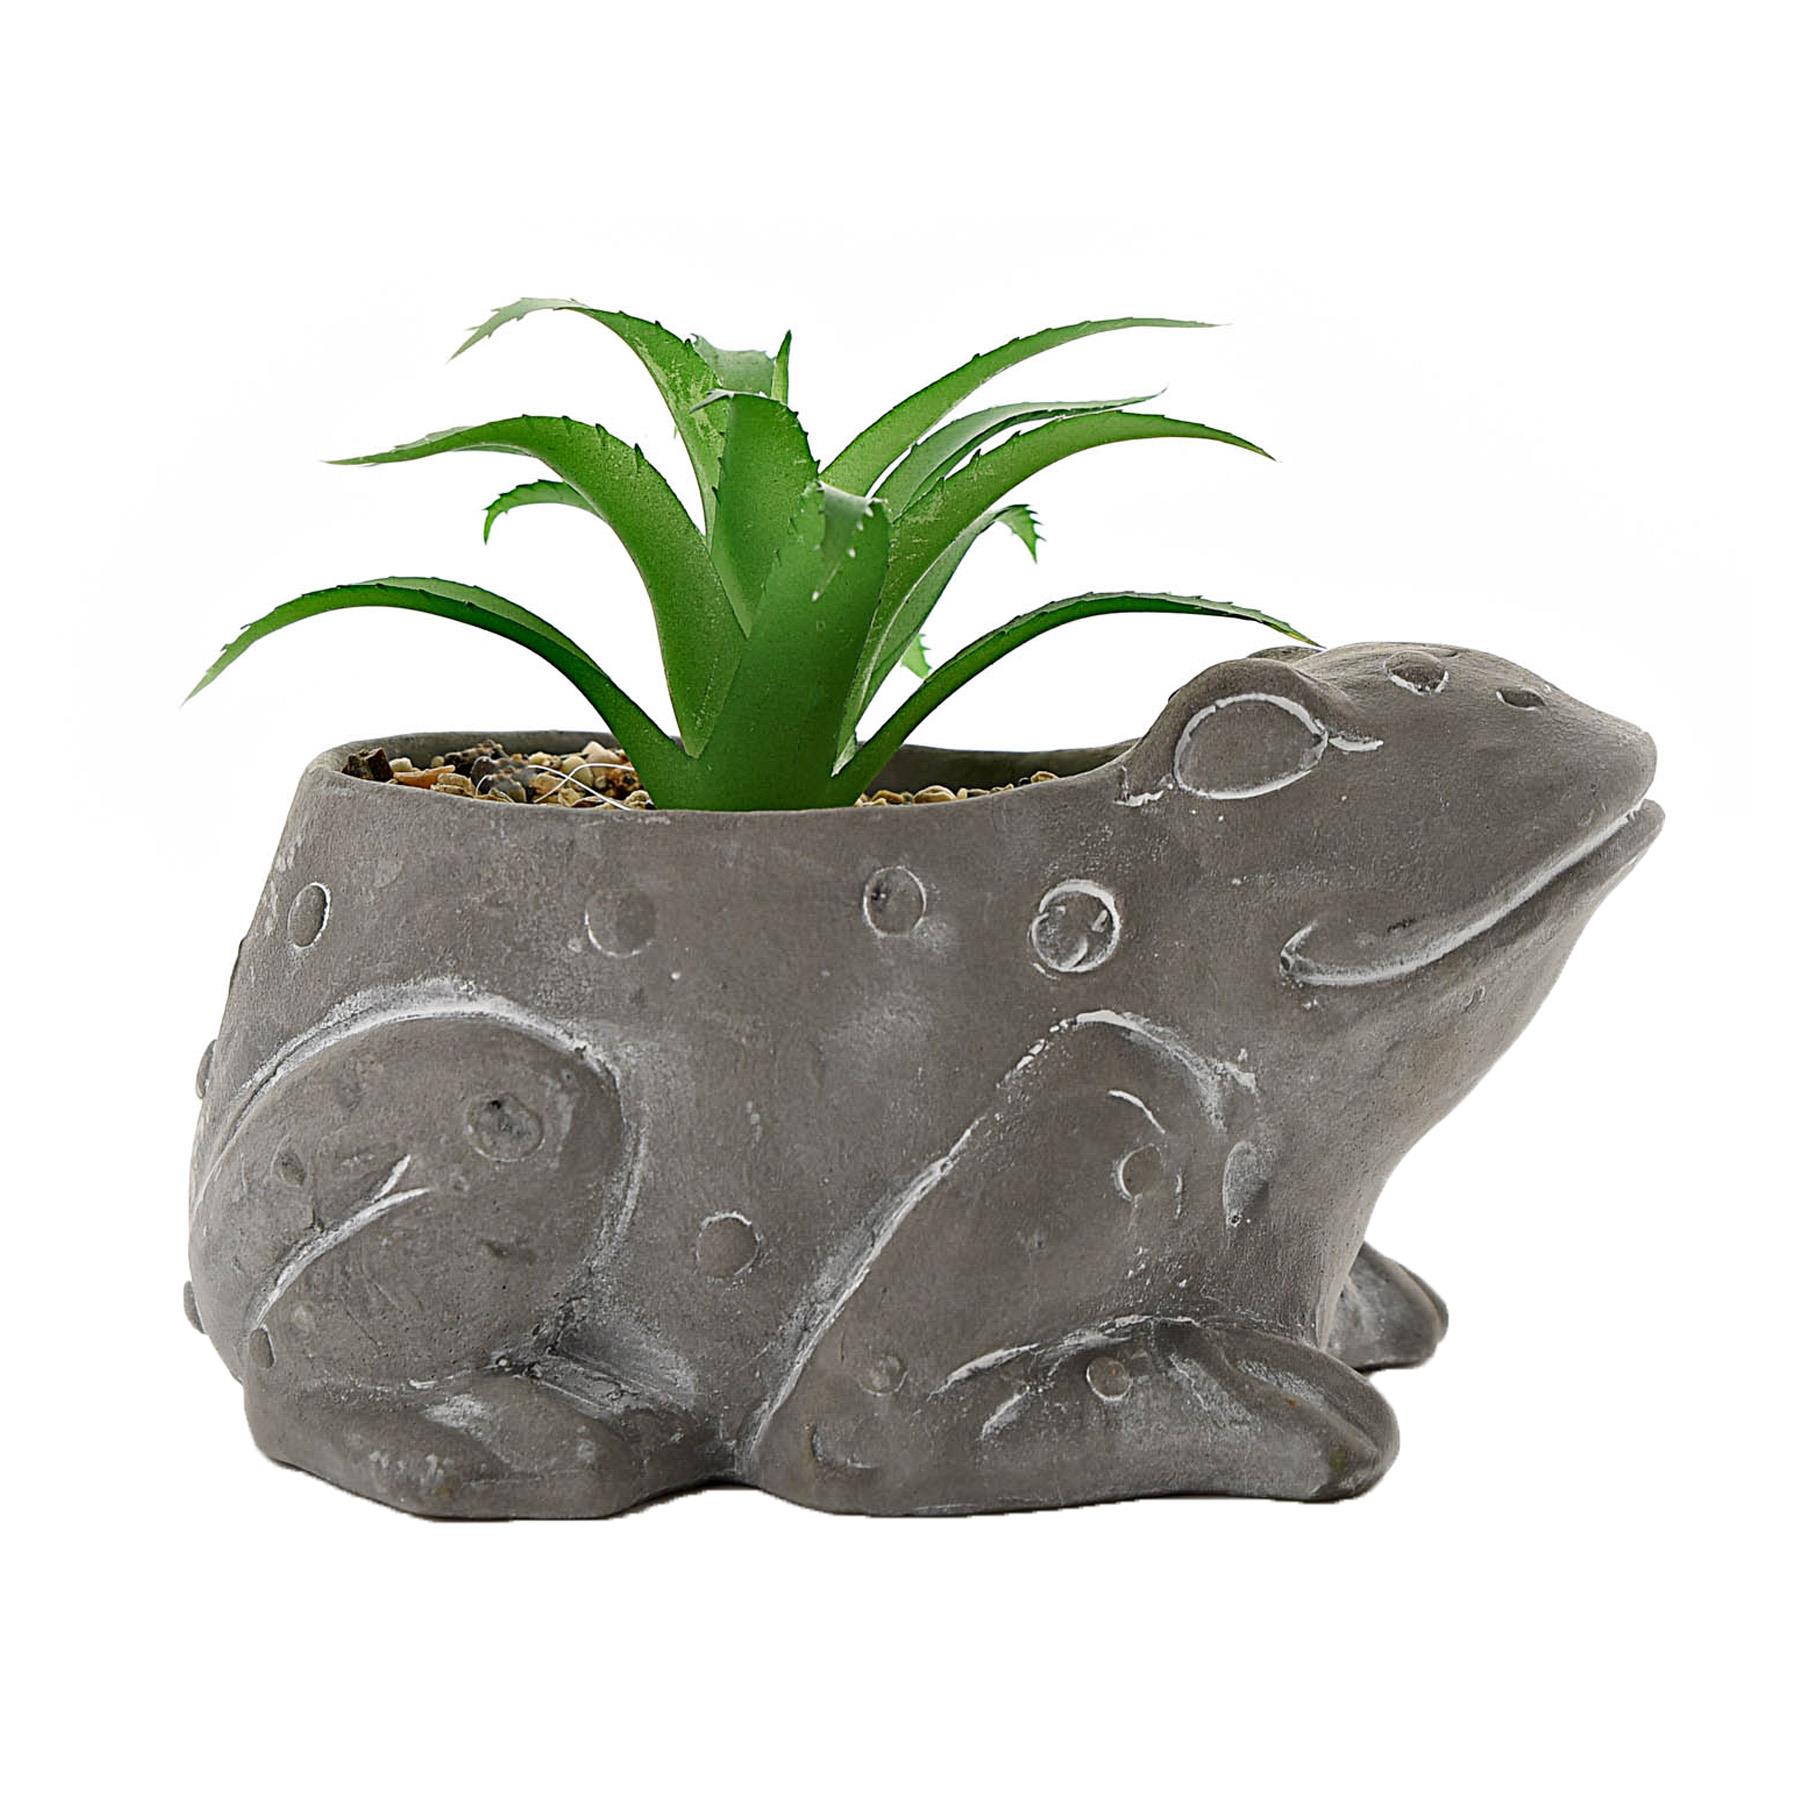 Cement Effect Animal Planter with Succulent - Frog